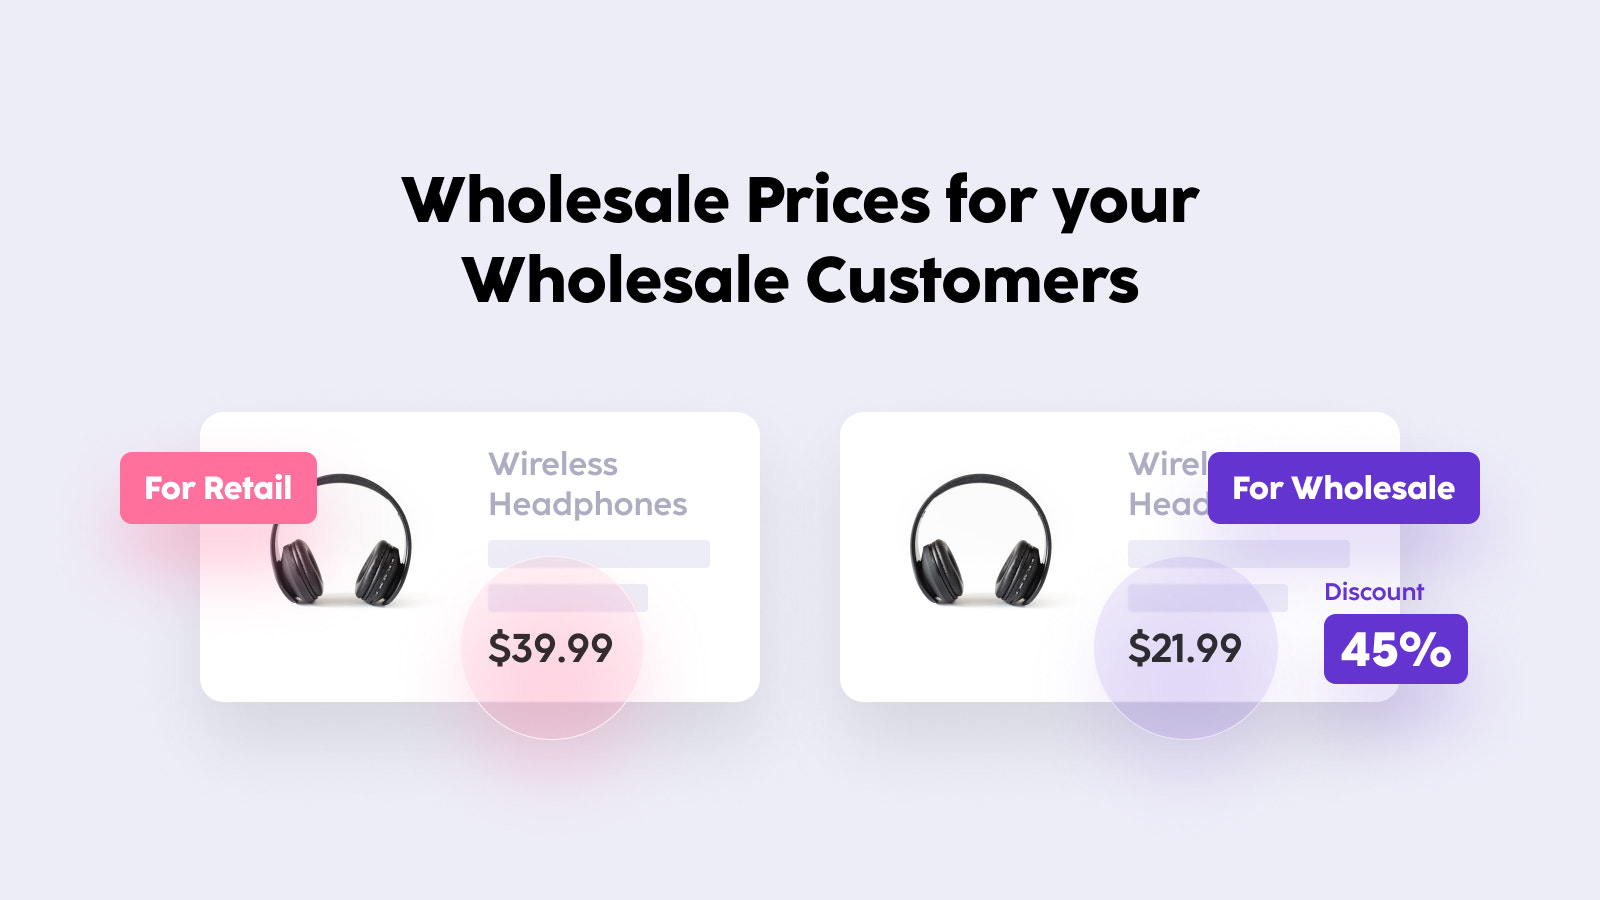 Wholesale Pricing Discount